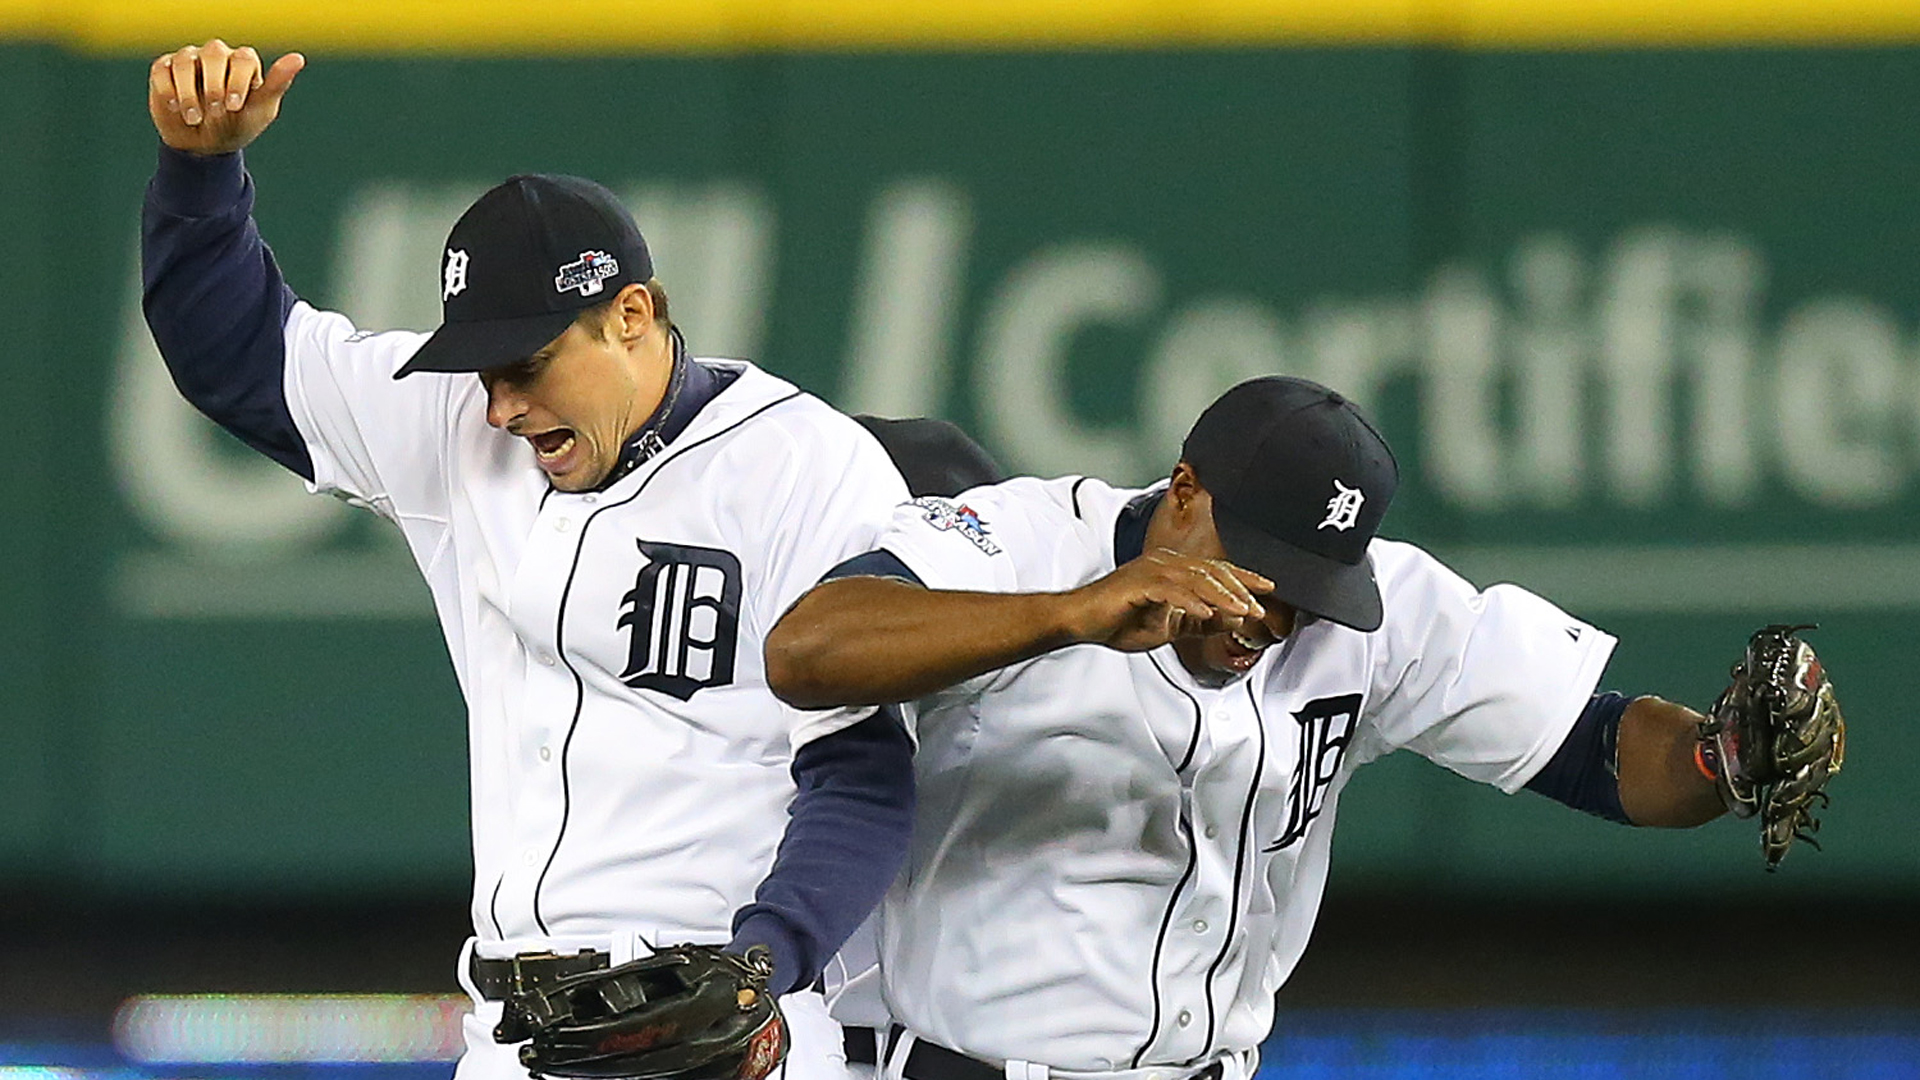 Tigers Red Sox Series A Ratings Winner For Fox Variety